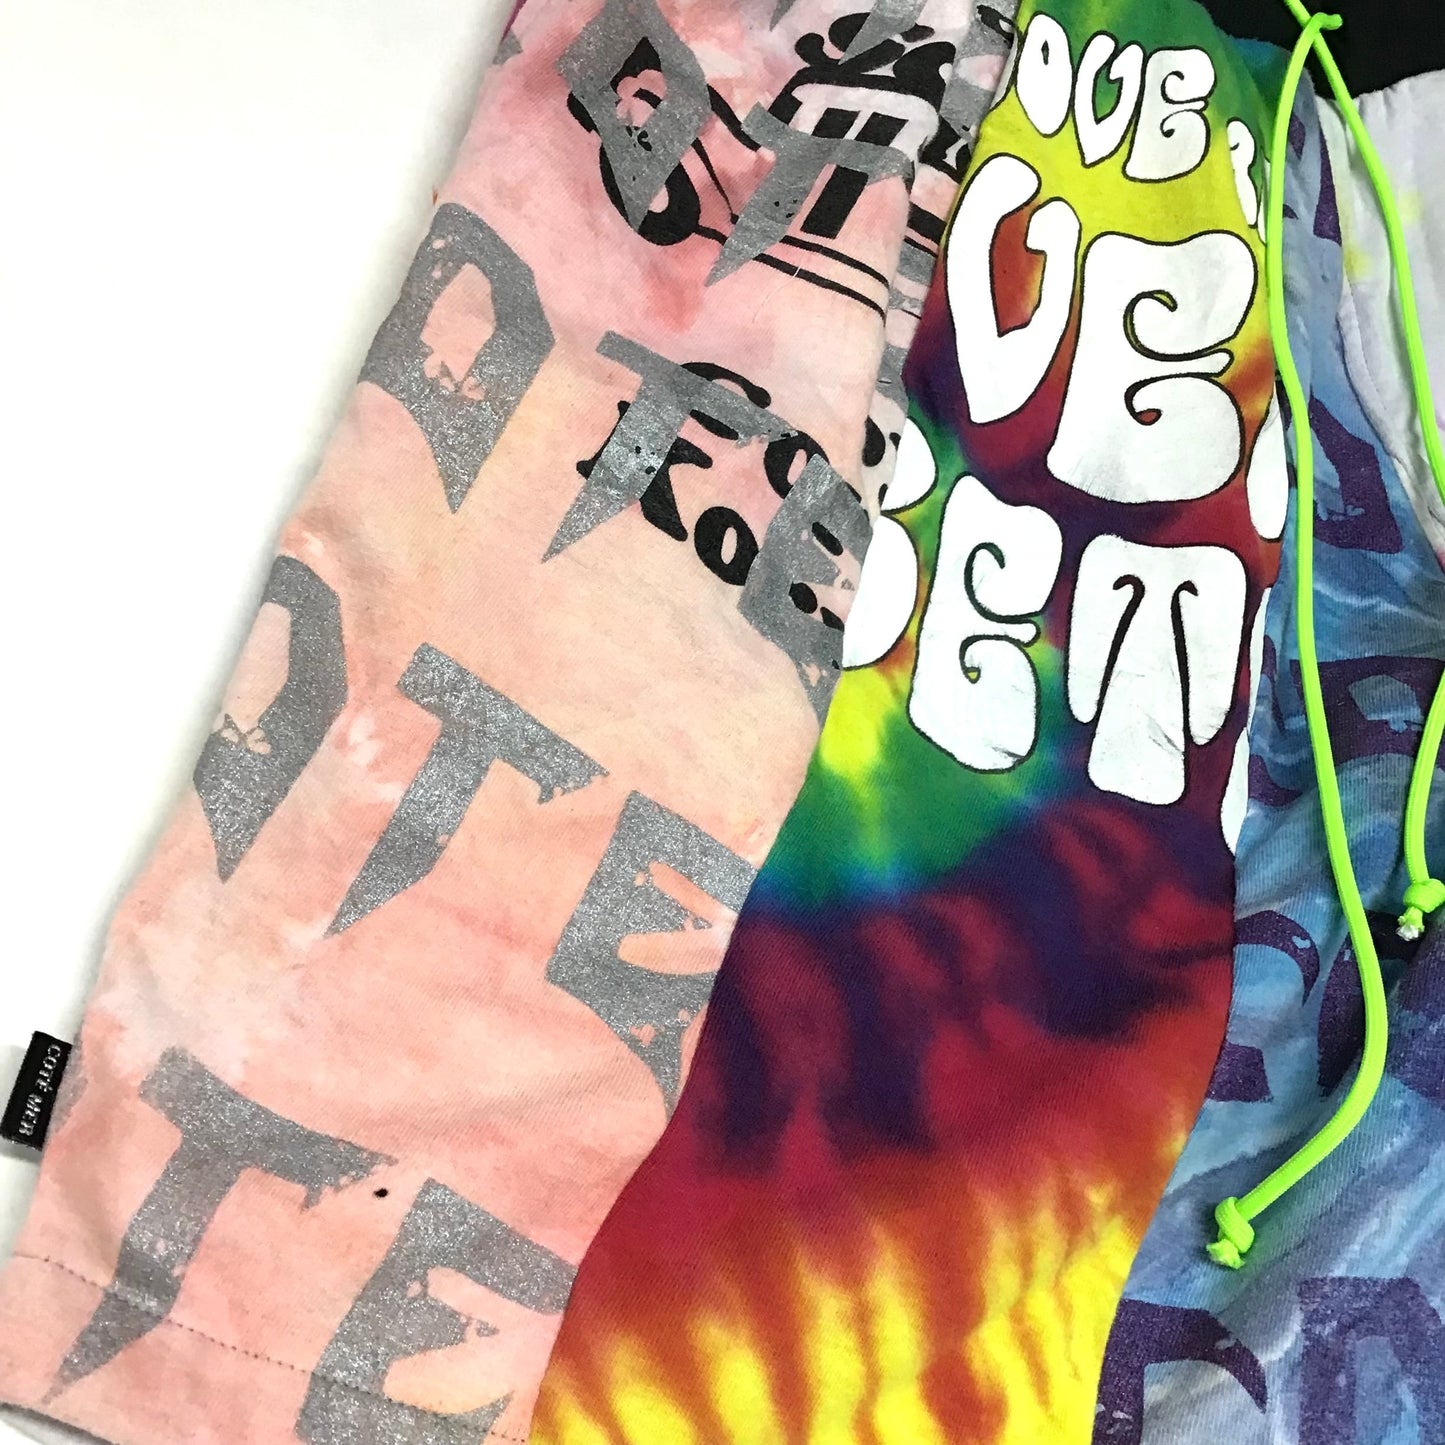 Remake Baggy Hiphop Loose Psychedelic Colorful Bespoke Hypebeast Japanese Vintage Wagara Graphics Style  Handmade Custom One and Only One Cote Mer Upcycle Sustainable Street Fashion Bleached Tie Dye Half Pants Shorts Bottoms ( Size : L )